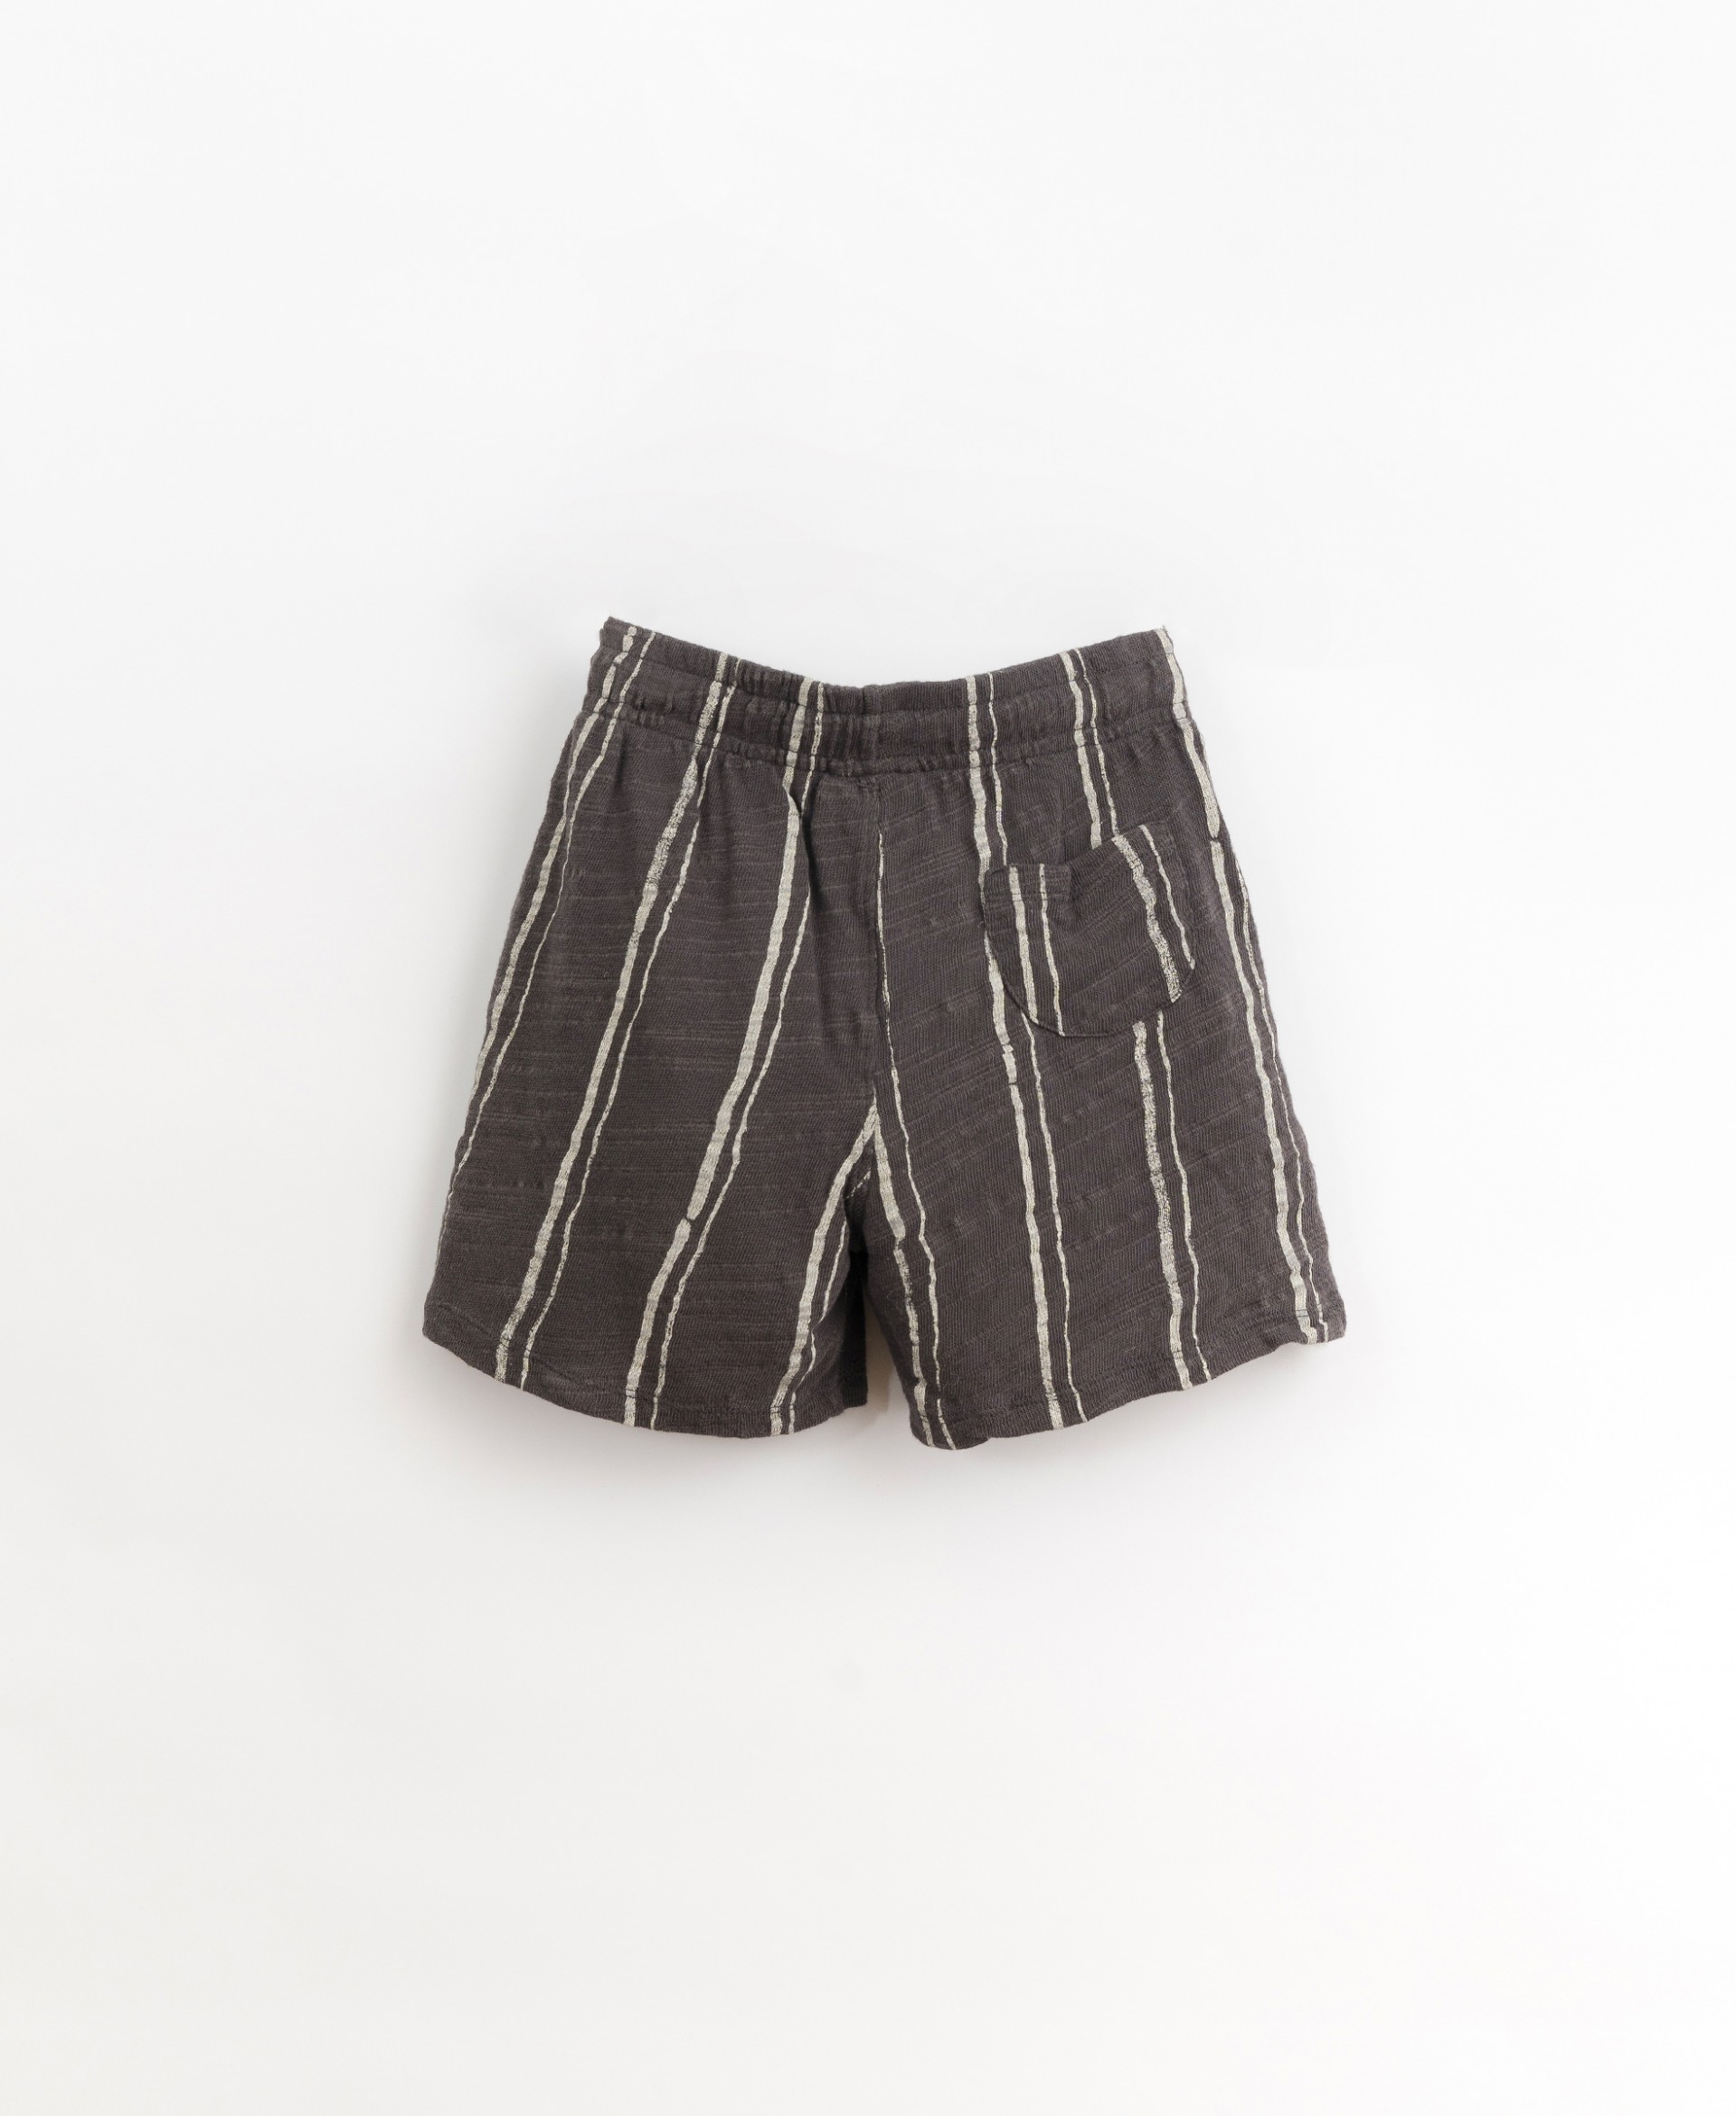 Jersey stitch shorts with pockets and adjustable drawstring | Organic Care